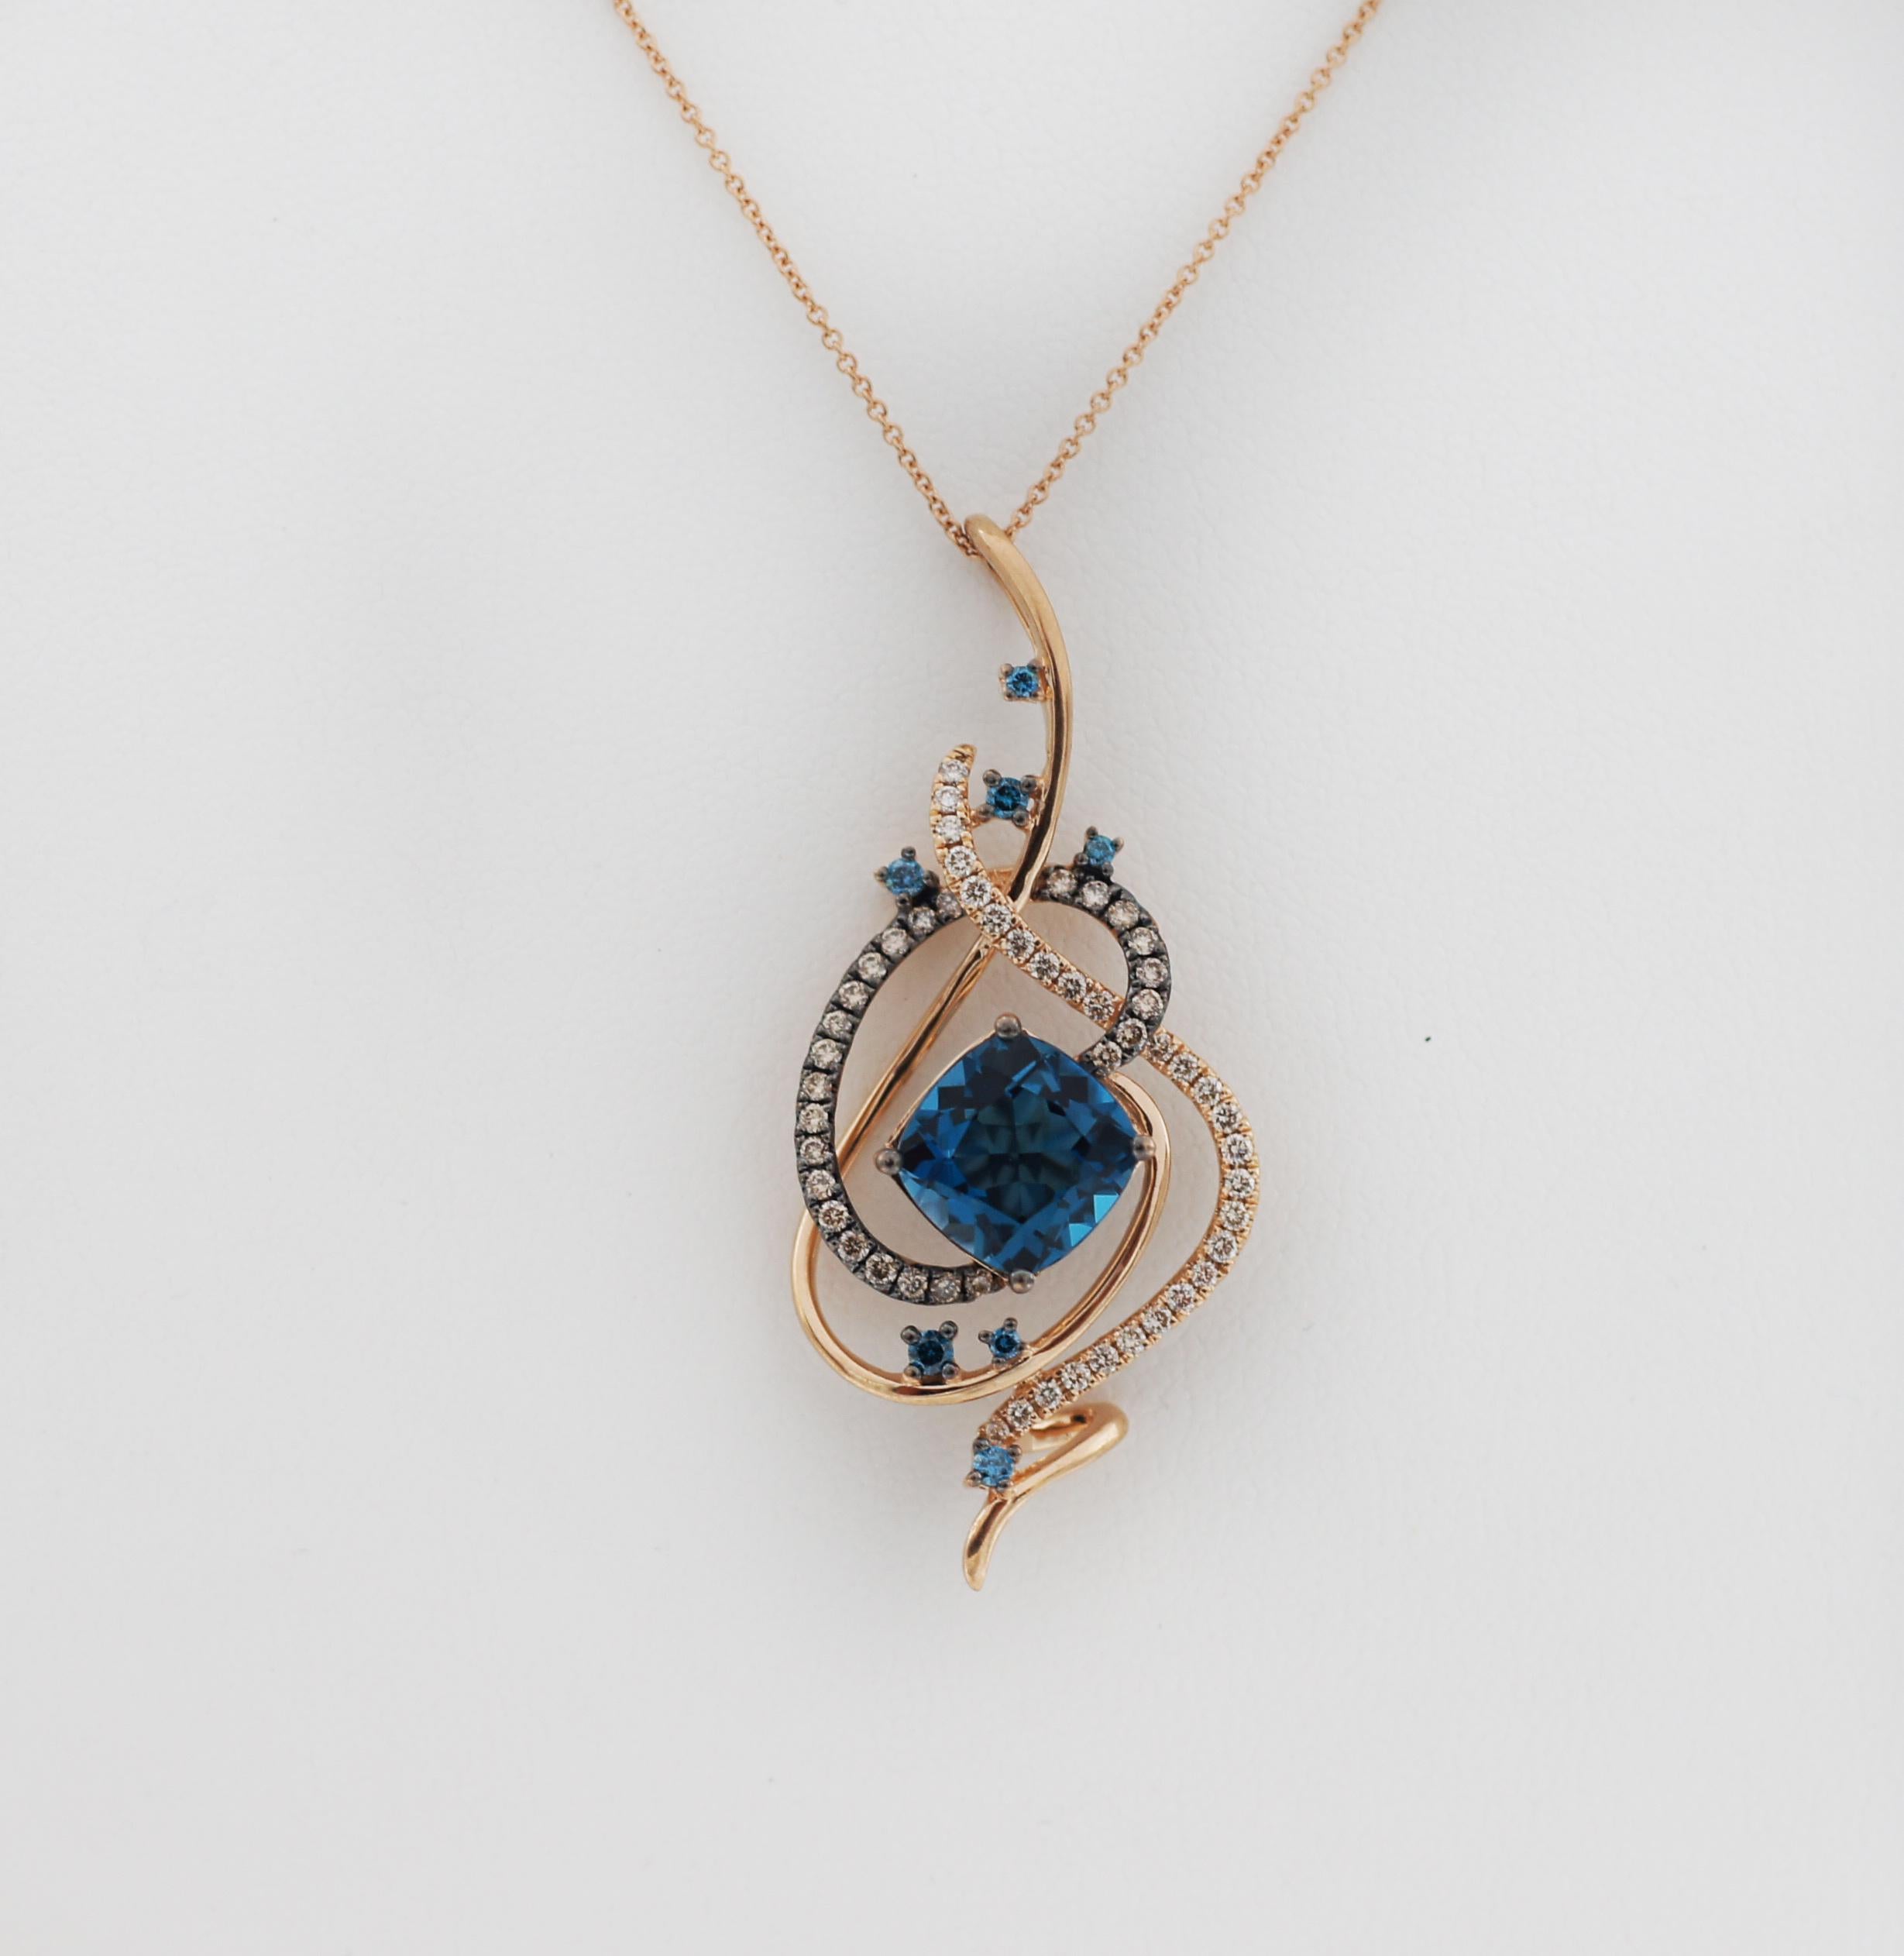 Le Vian
Stunning necklace from the Crazy Collection which inspires breathtaking elegance with the gorgeous rose color and design of this incredible cushion-shape Deep Sea Blue Topaz (Approx. 5-3/8 ct. t.w.) pendant. Necklace executed with artistic